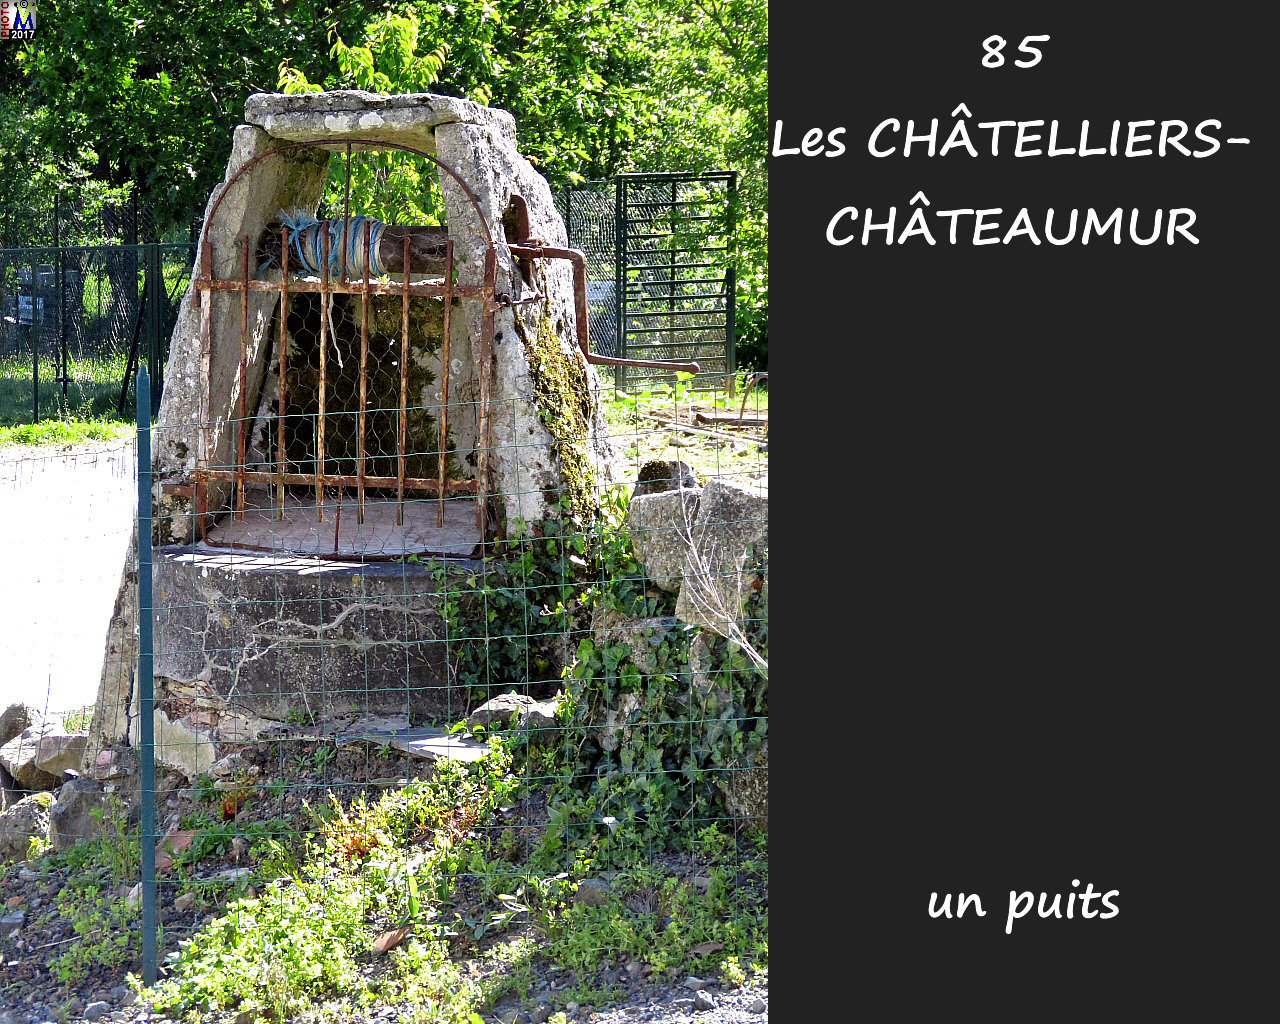 85CHATELLIERS-CHATEAUMUR_puits_1010.jpg